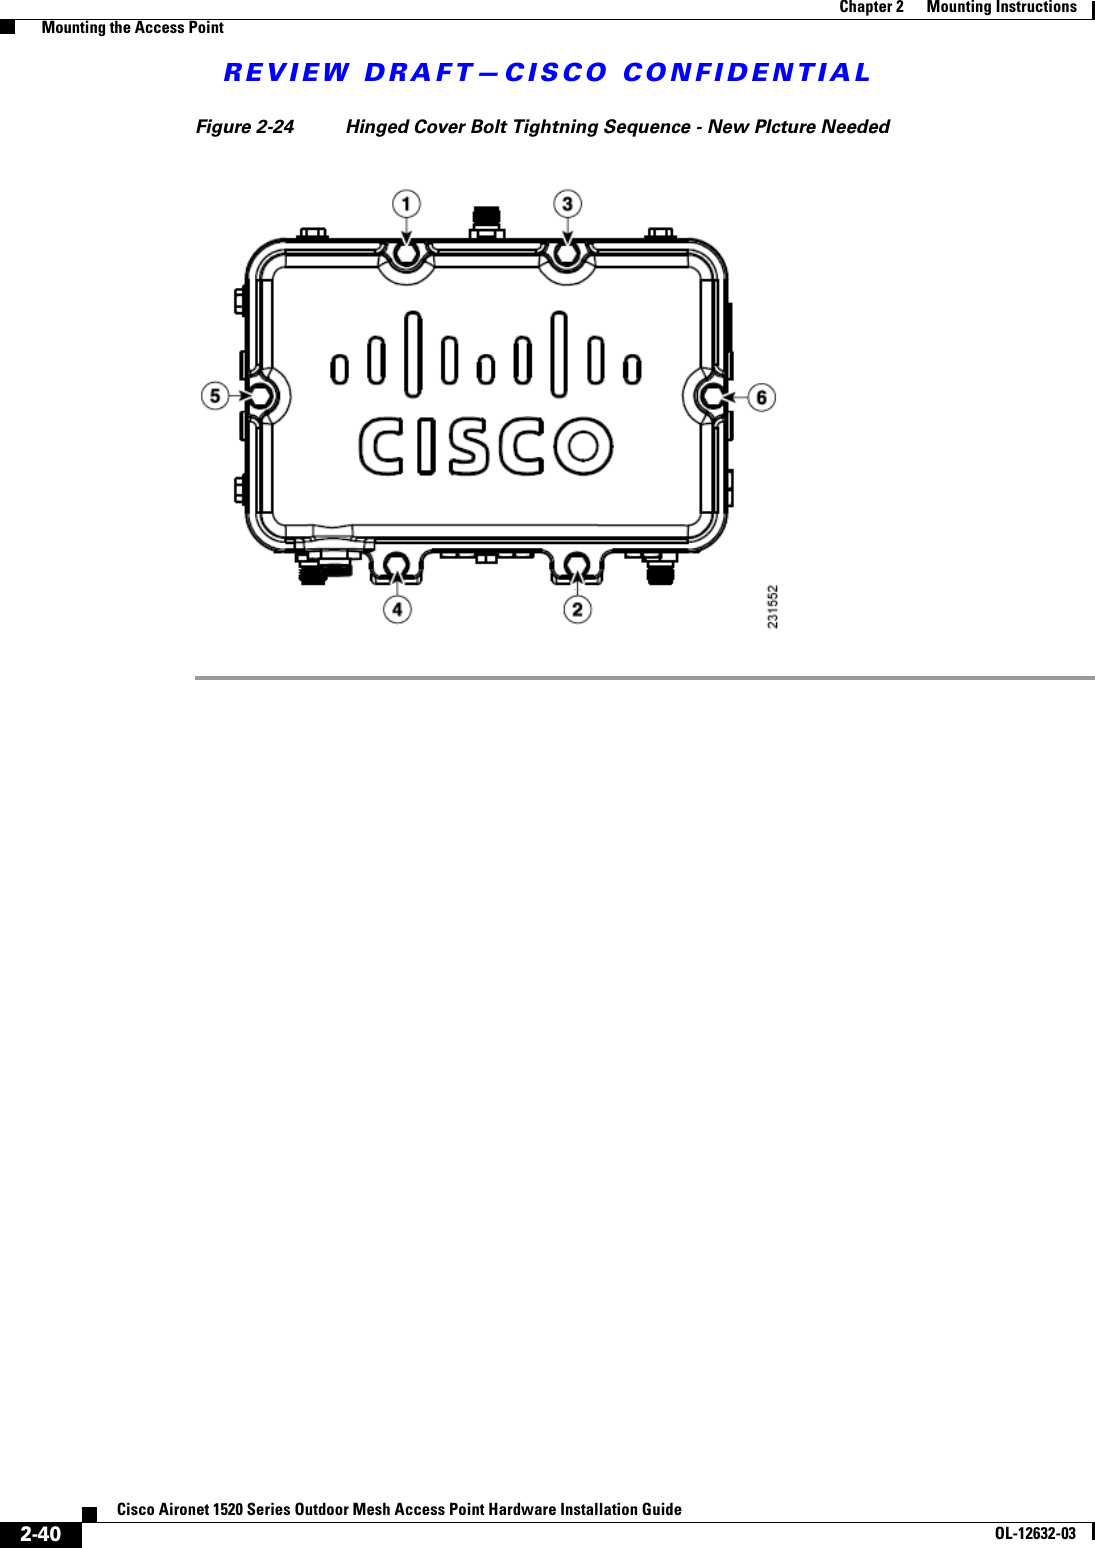 REVIEW DRAFT—CISCO CONFIDENTIAL2-40Cisco Aironet 1520 Series Outdoor Mesh Access Point Hardware Installation GuideOL-12632-03Chapter 2      Mounting Instructions  Mounting the Access PointFigure 2-24 Hinged Cover Bolt Tightning Sequence - New PIcture Needed